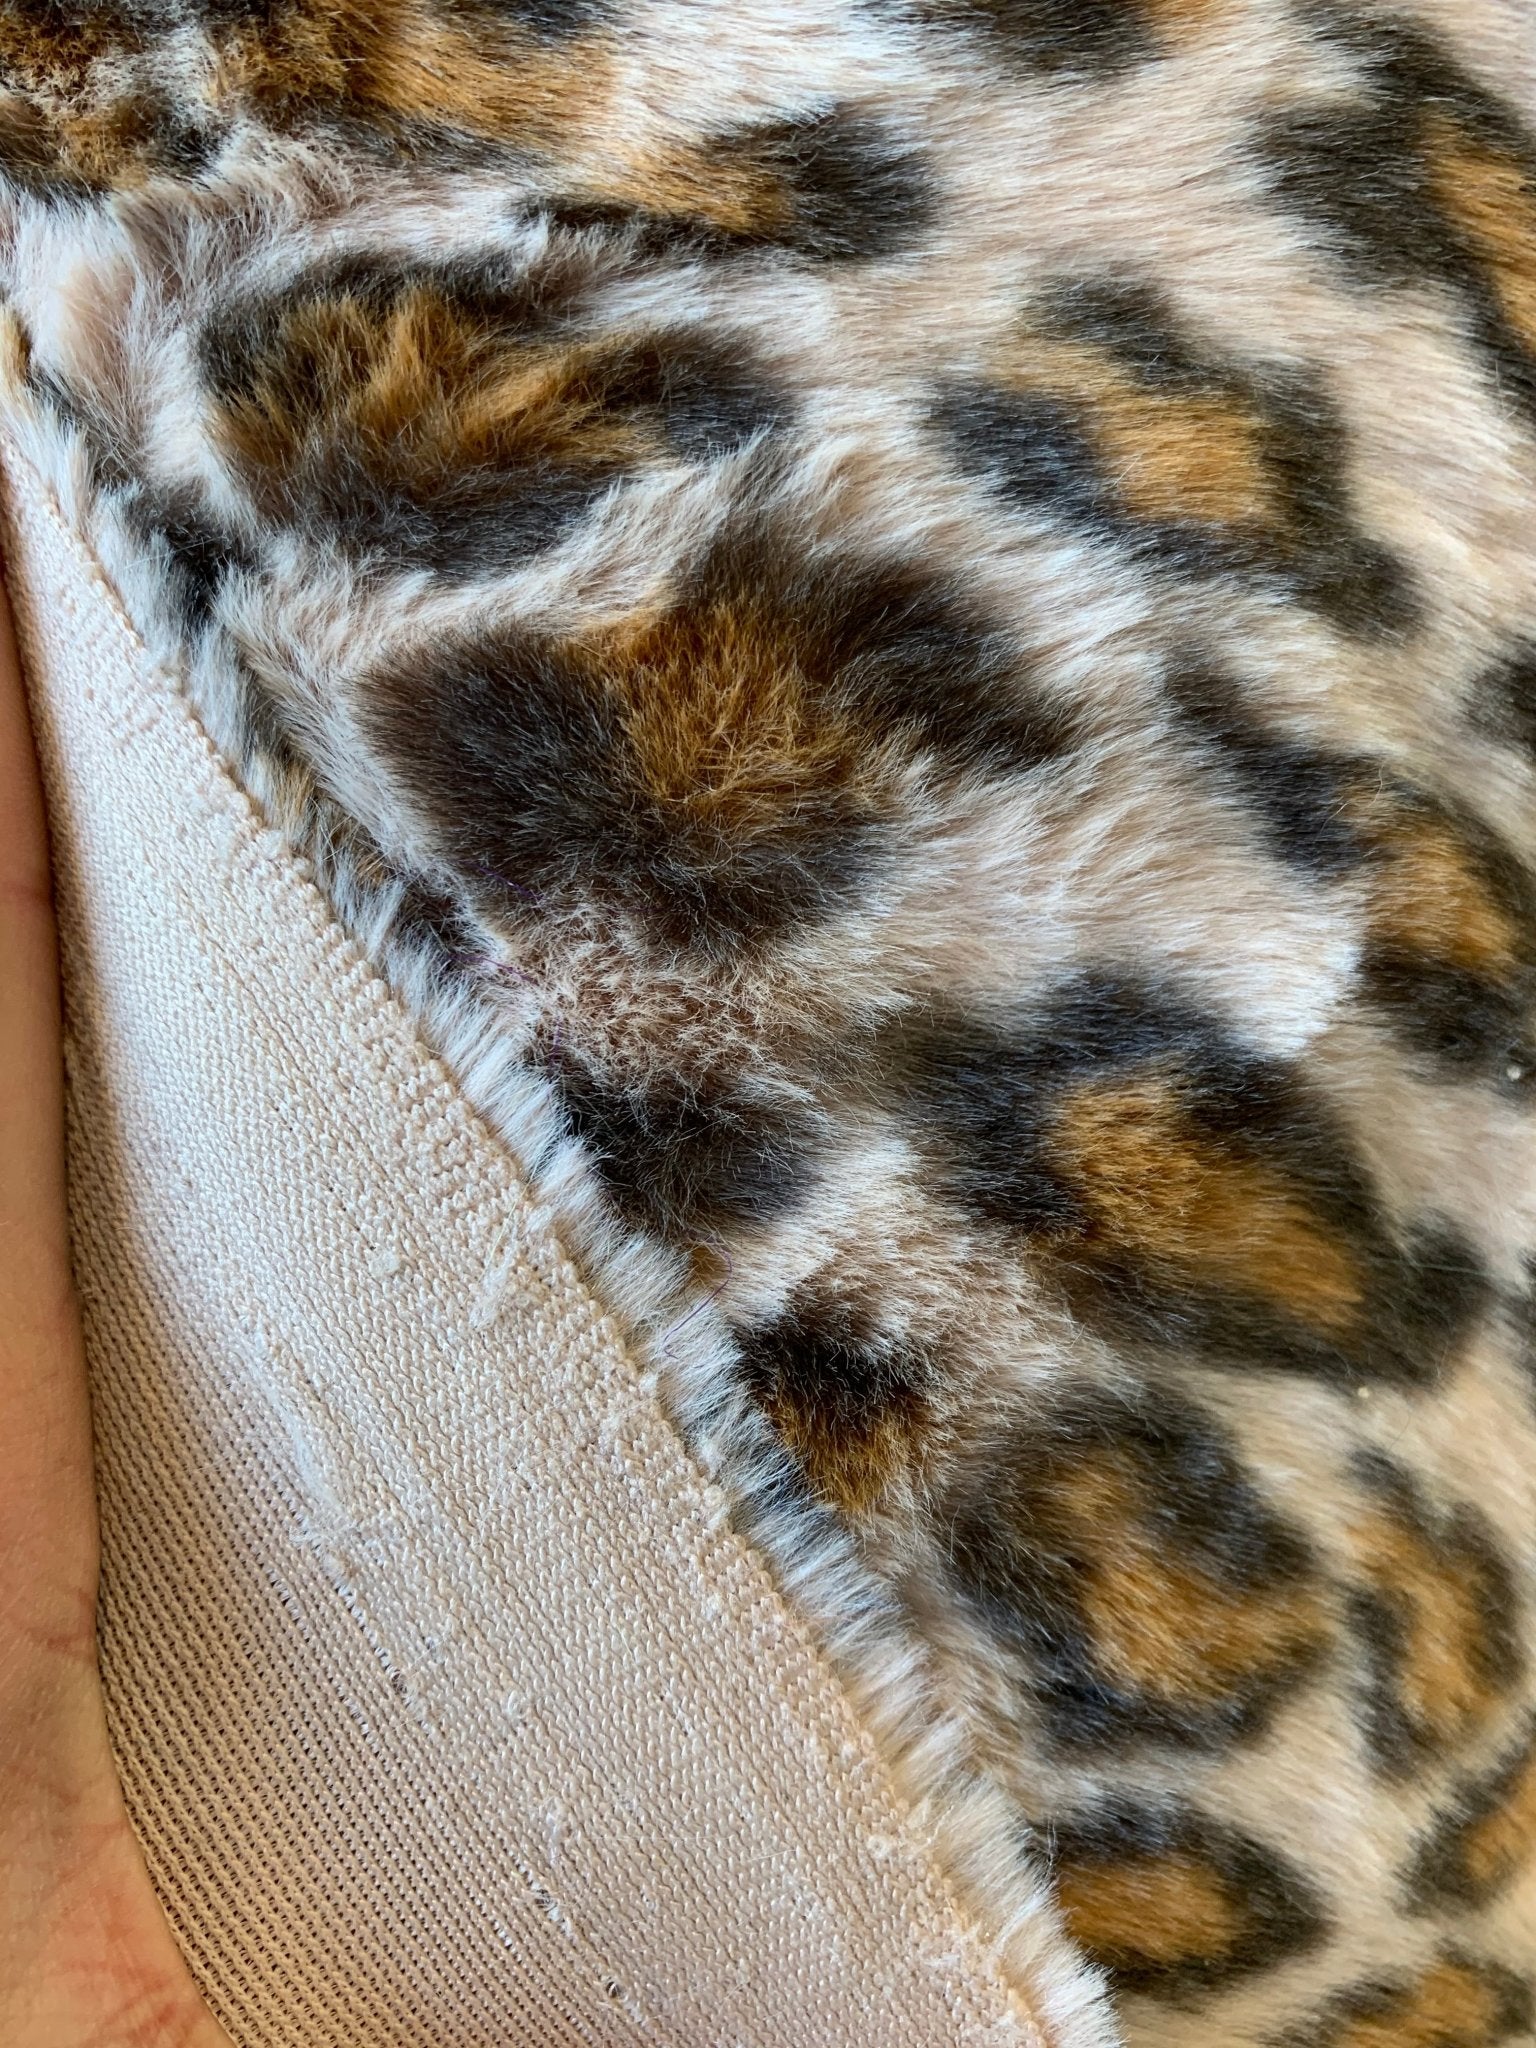 Leopard Fake Faux Fur Fabric By The Yard - Faux Fur Material Fashion FabricICEFABRICICE FABRICSBrownBy The Yard (60 inches Wide)Leopard Fake Faux Fur Fabric By The Yard - Faux Fur Material Fashion Fabric ICEFABRIC Brown